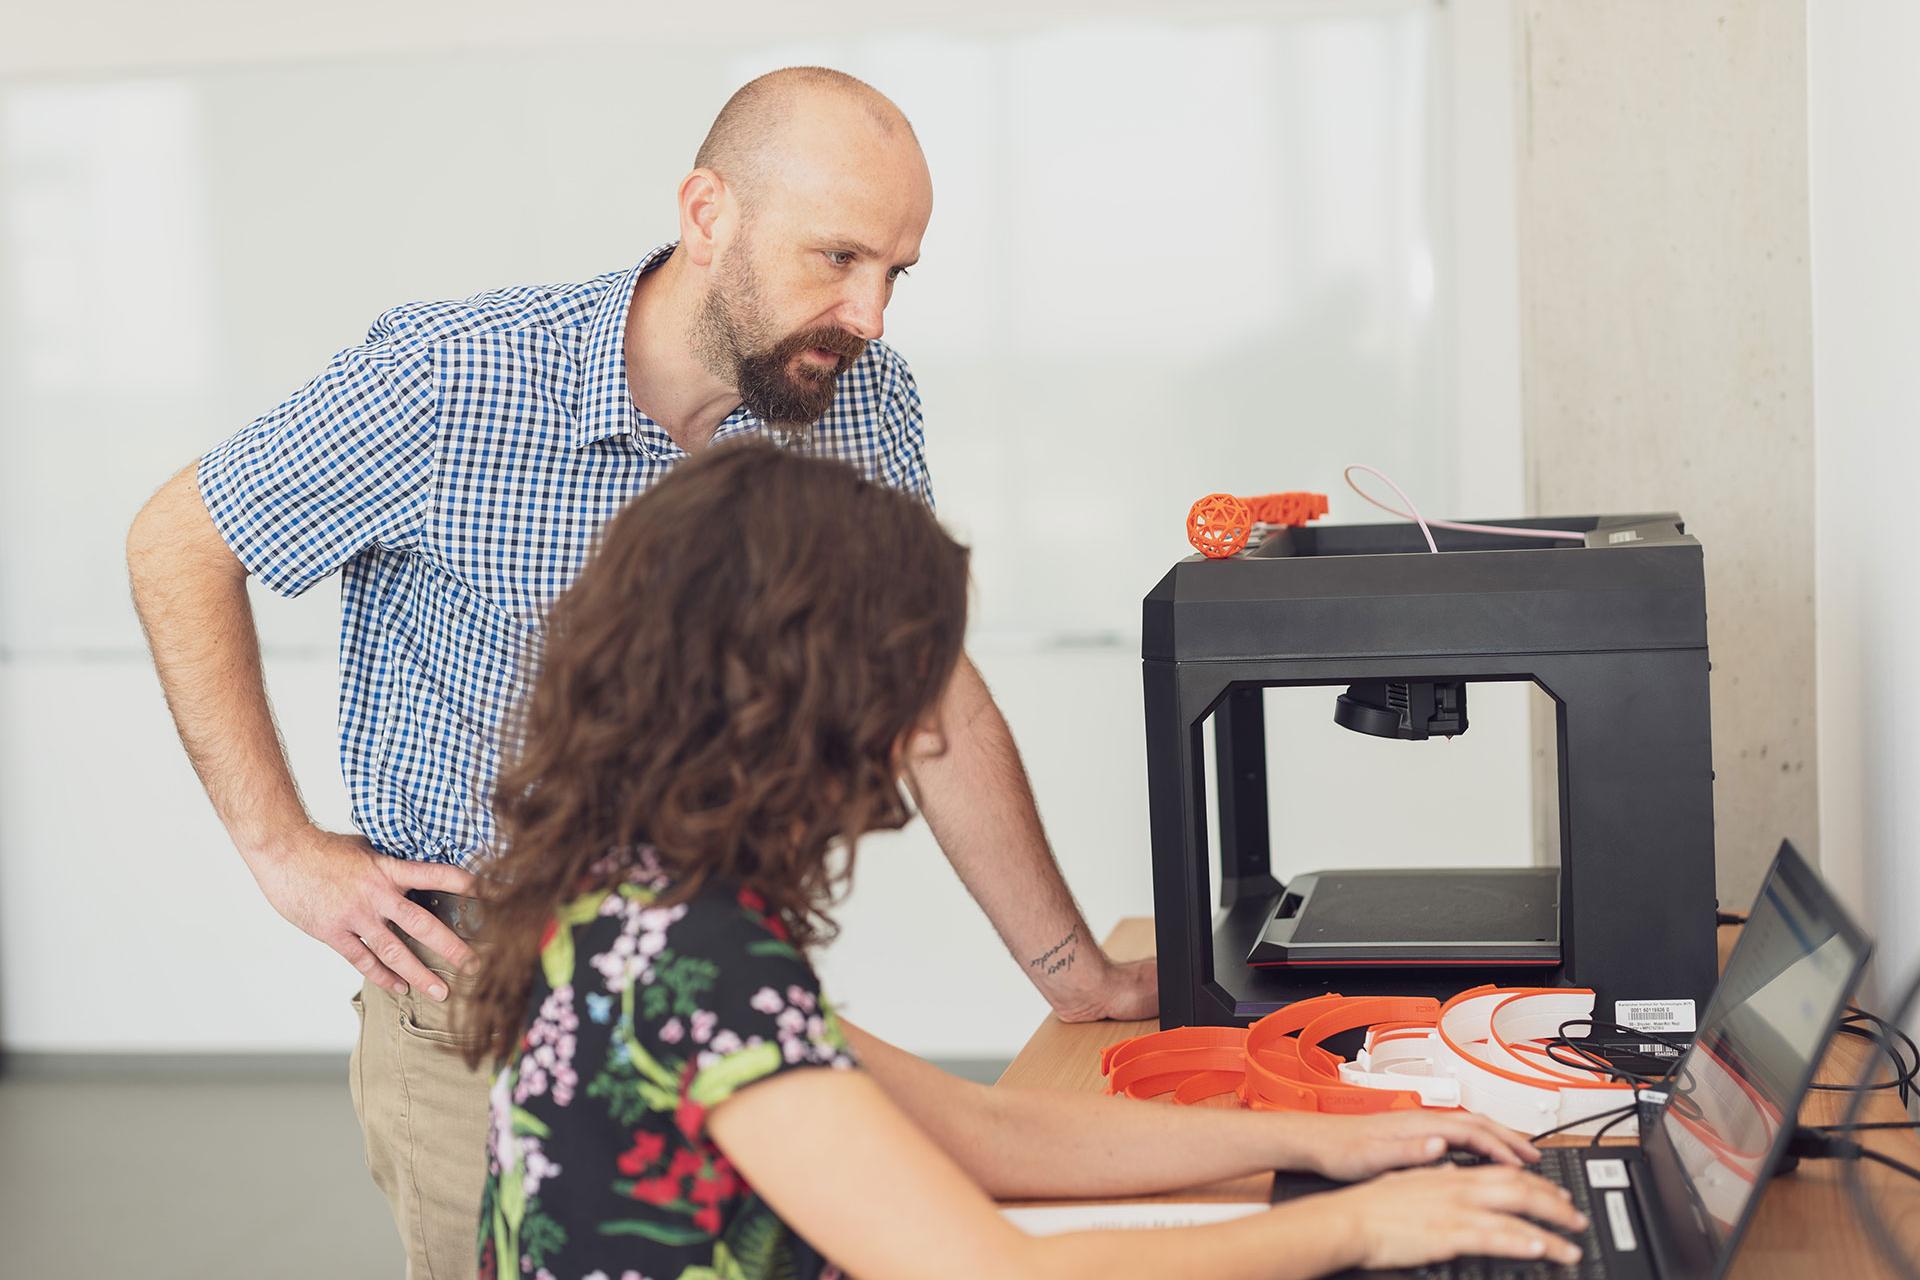 Two people are working in the Makerspace sitting at a desk using a laptop and a 3D printer.